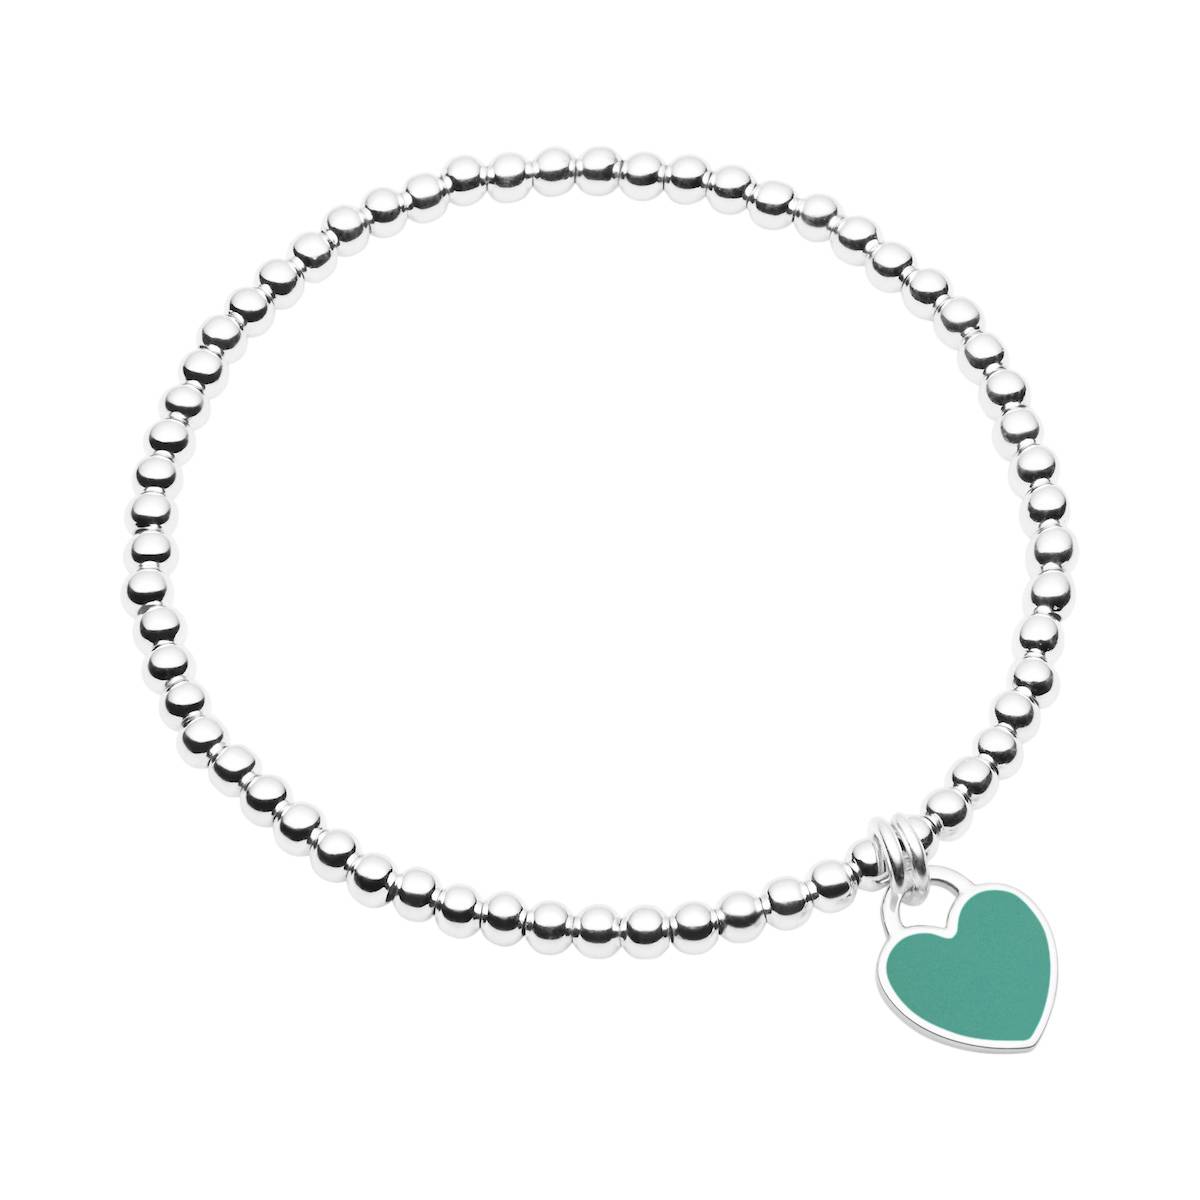 sterling silver stretch bracelet with teale mini heart that can be engraved